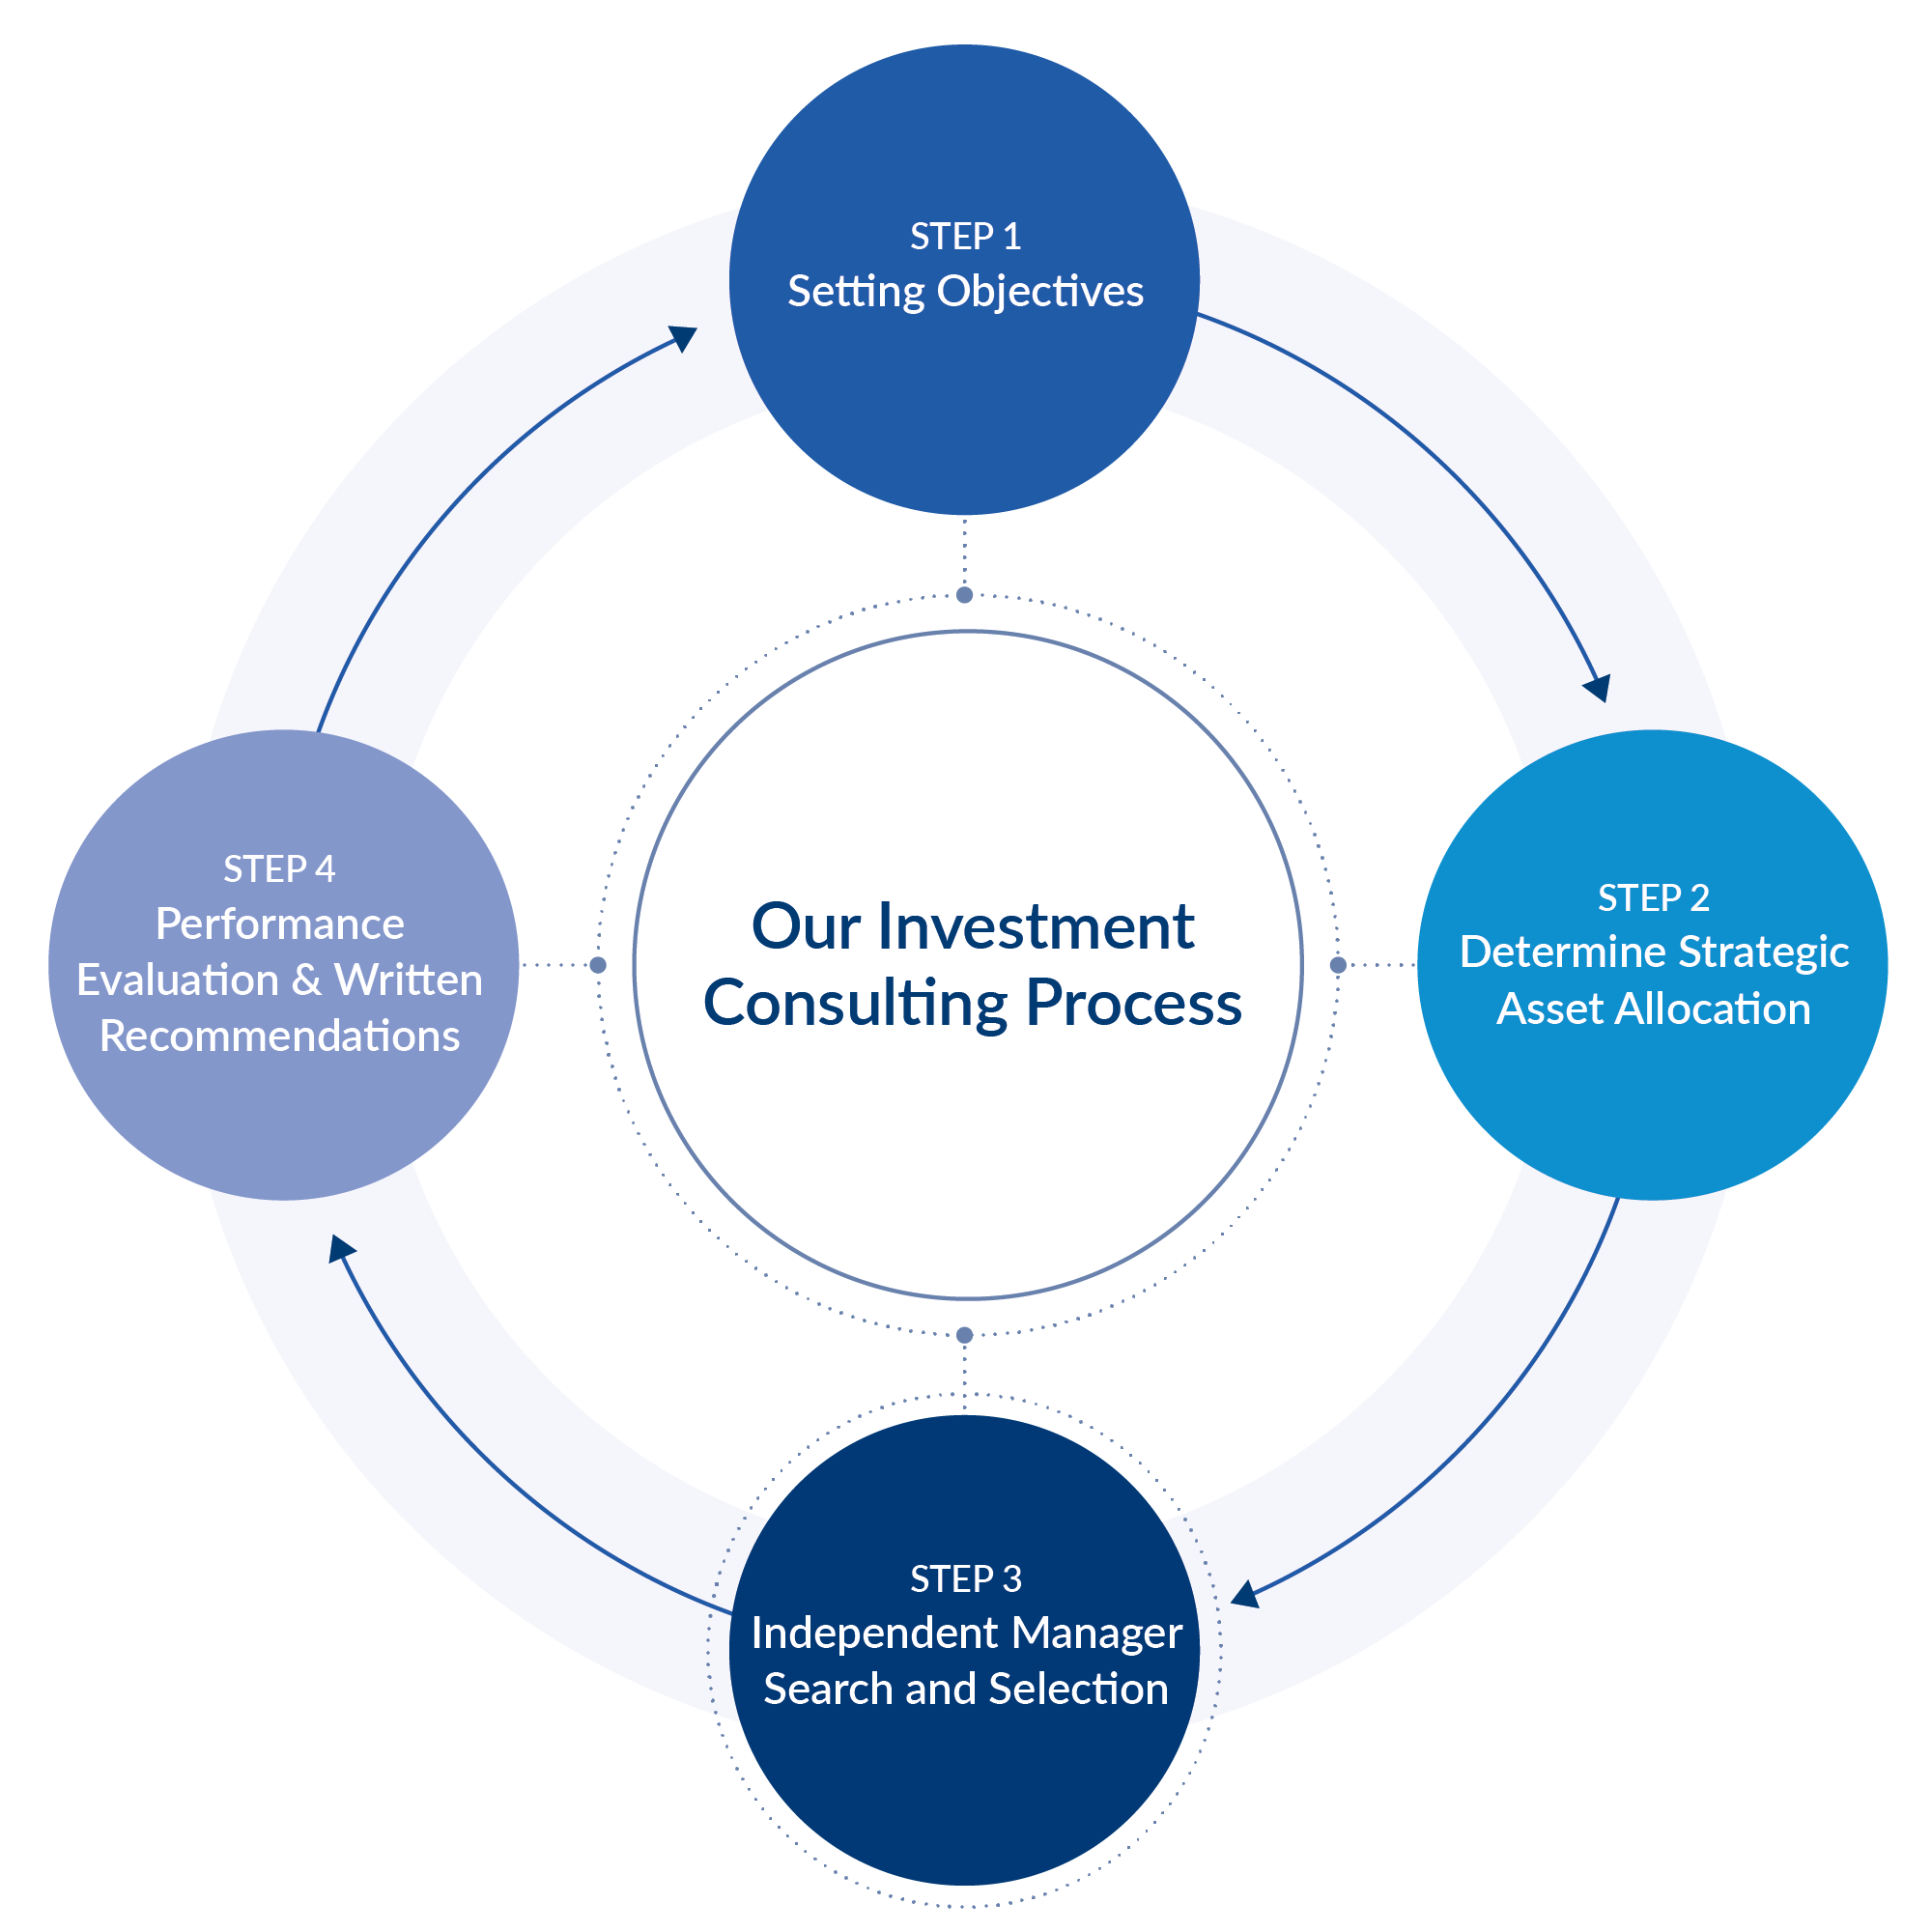 Our Investment Consulting Process